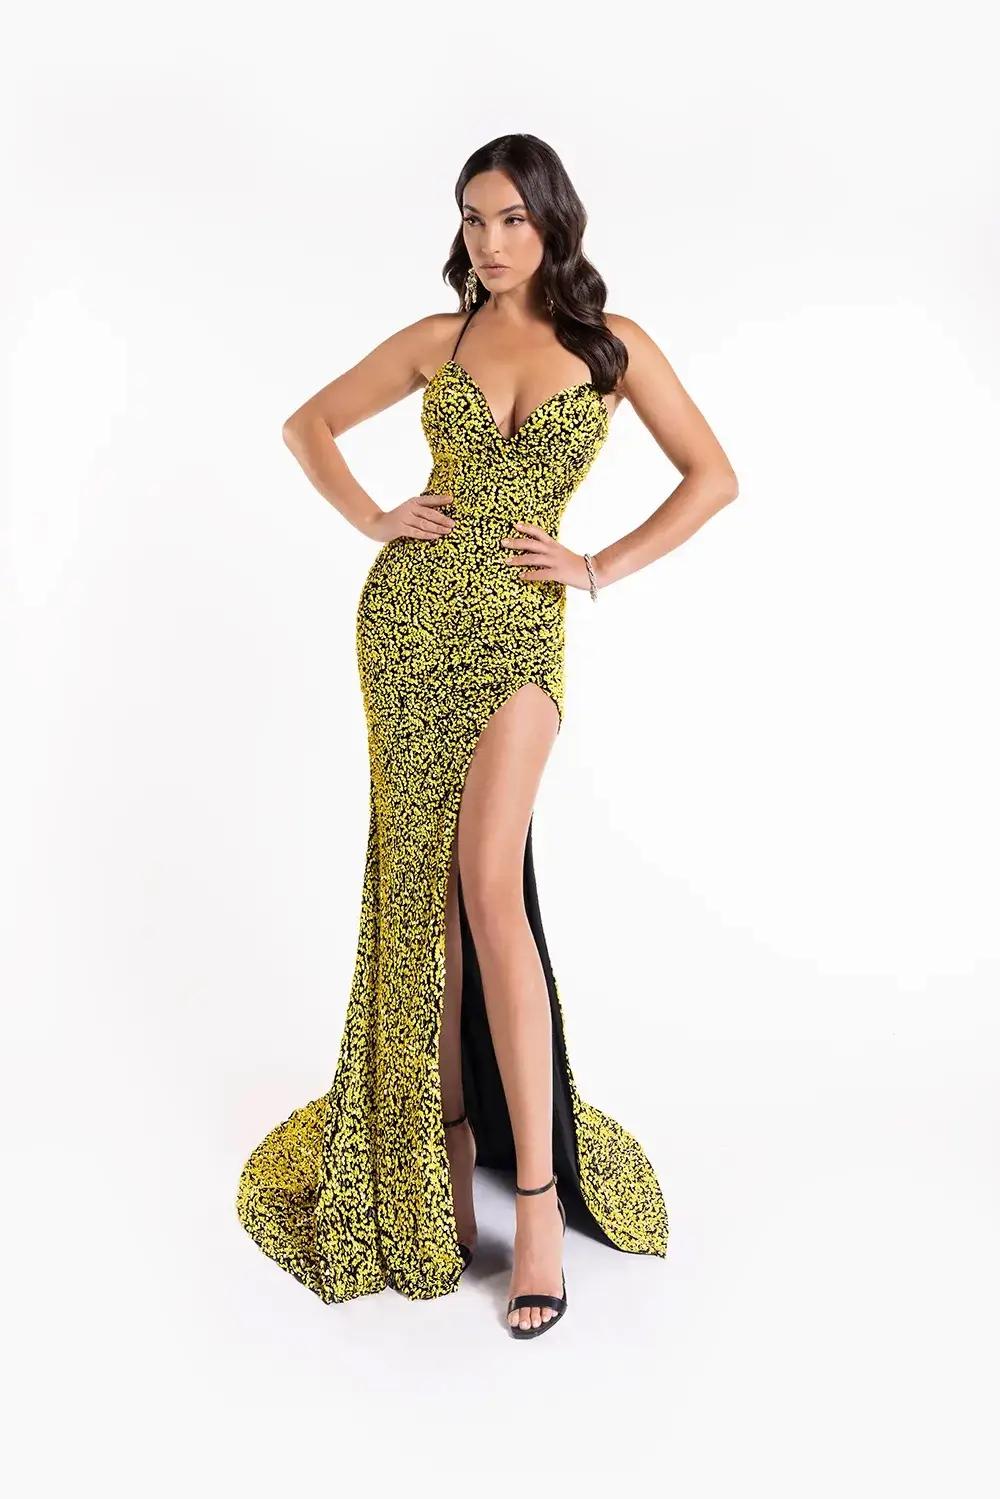 Model wearing a Abby Paris Spring green gown